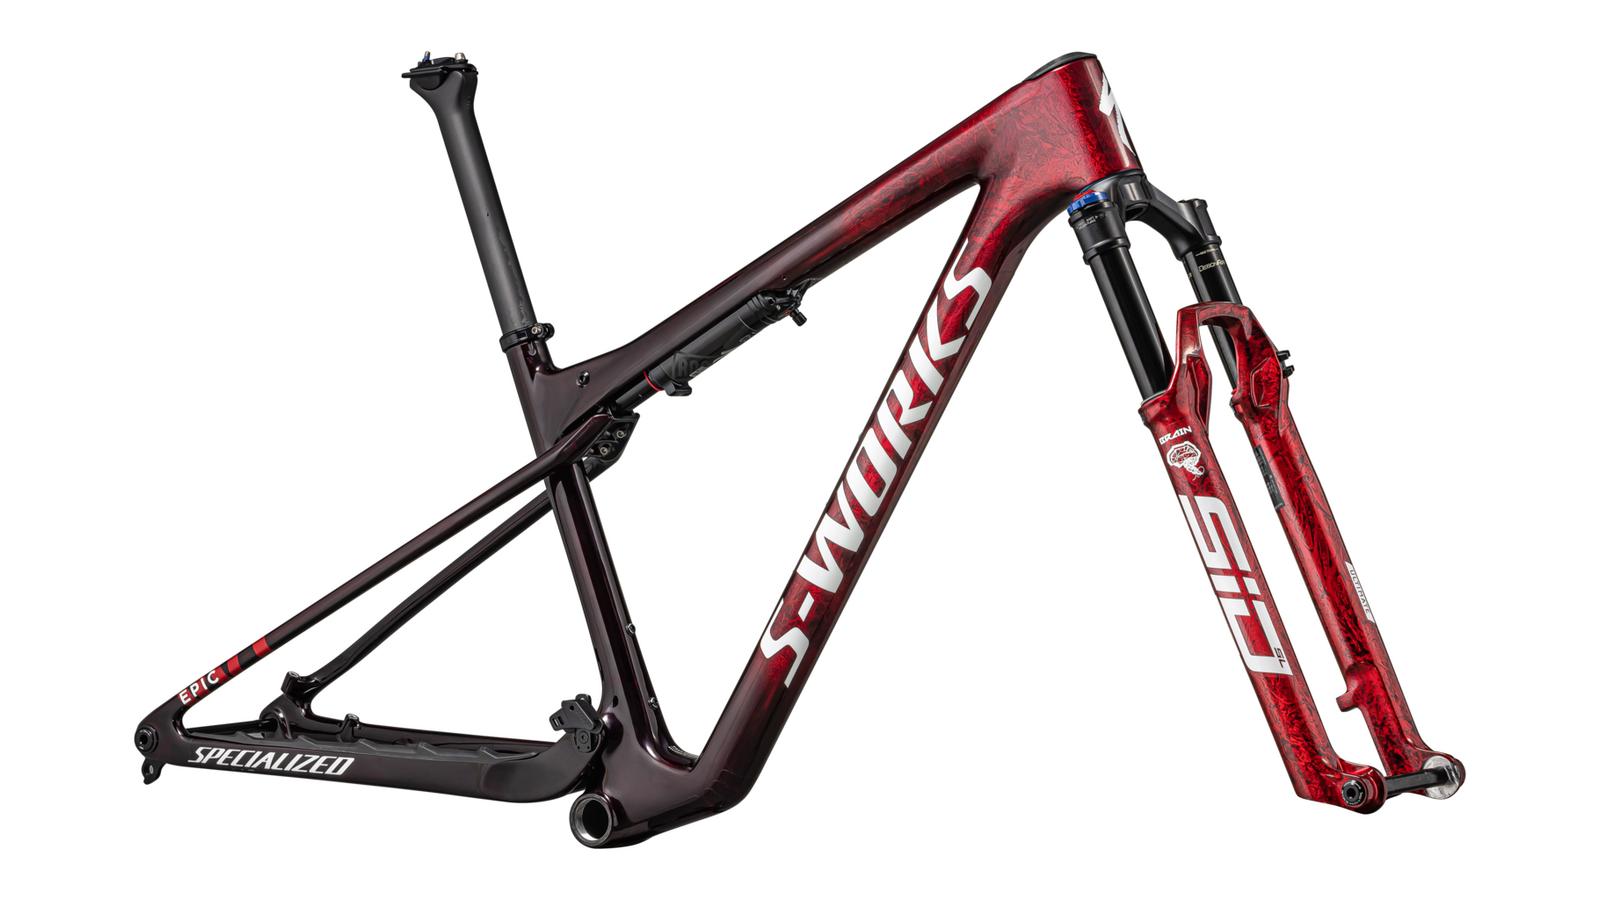 73123-0005-SPECIALIZED-EPIC WC SW FRMSET-FOR-SALE-NEAR-ME